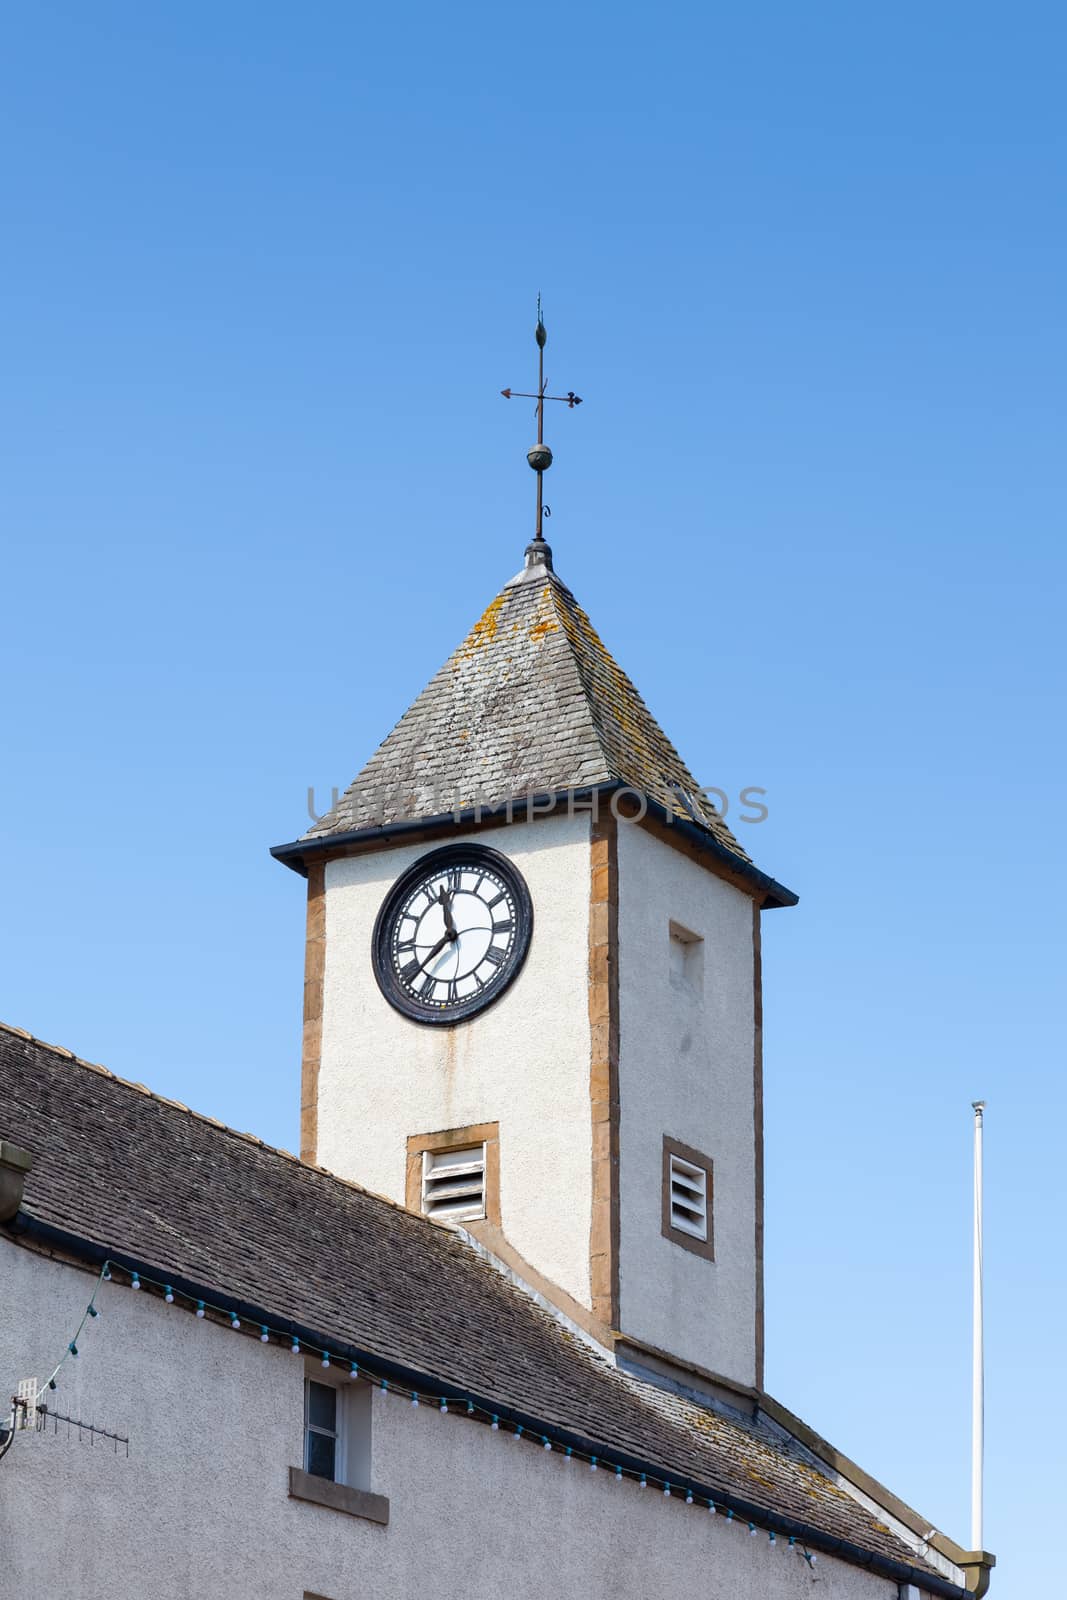 Lauder Town Hall Clock Tower by ATGImages